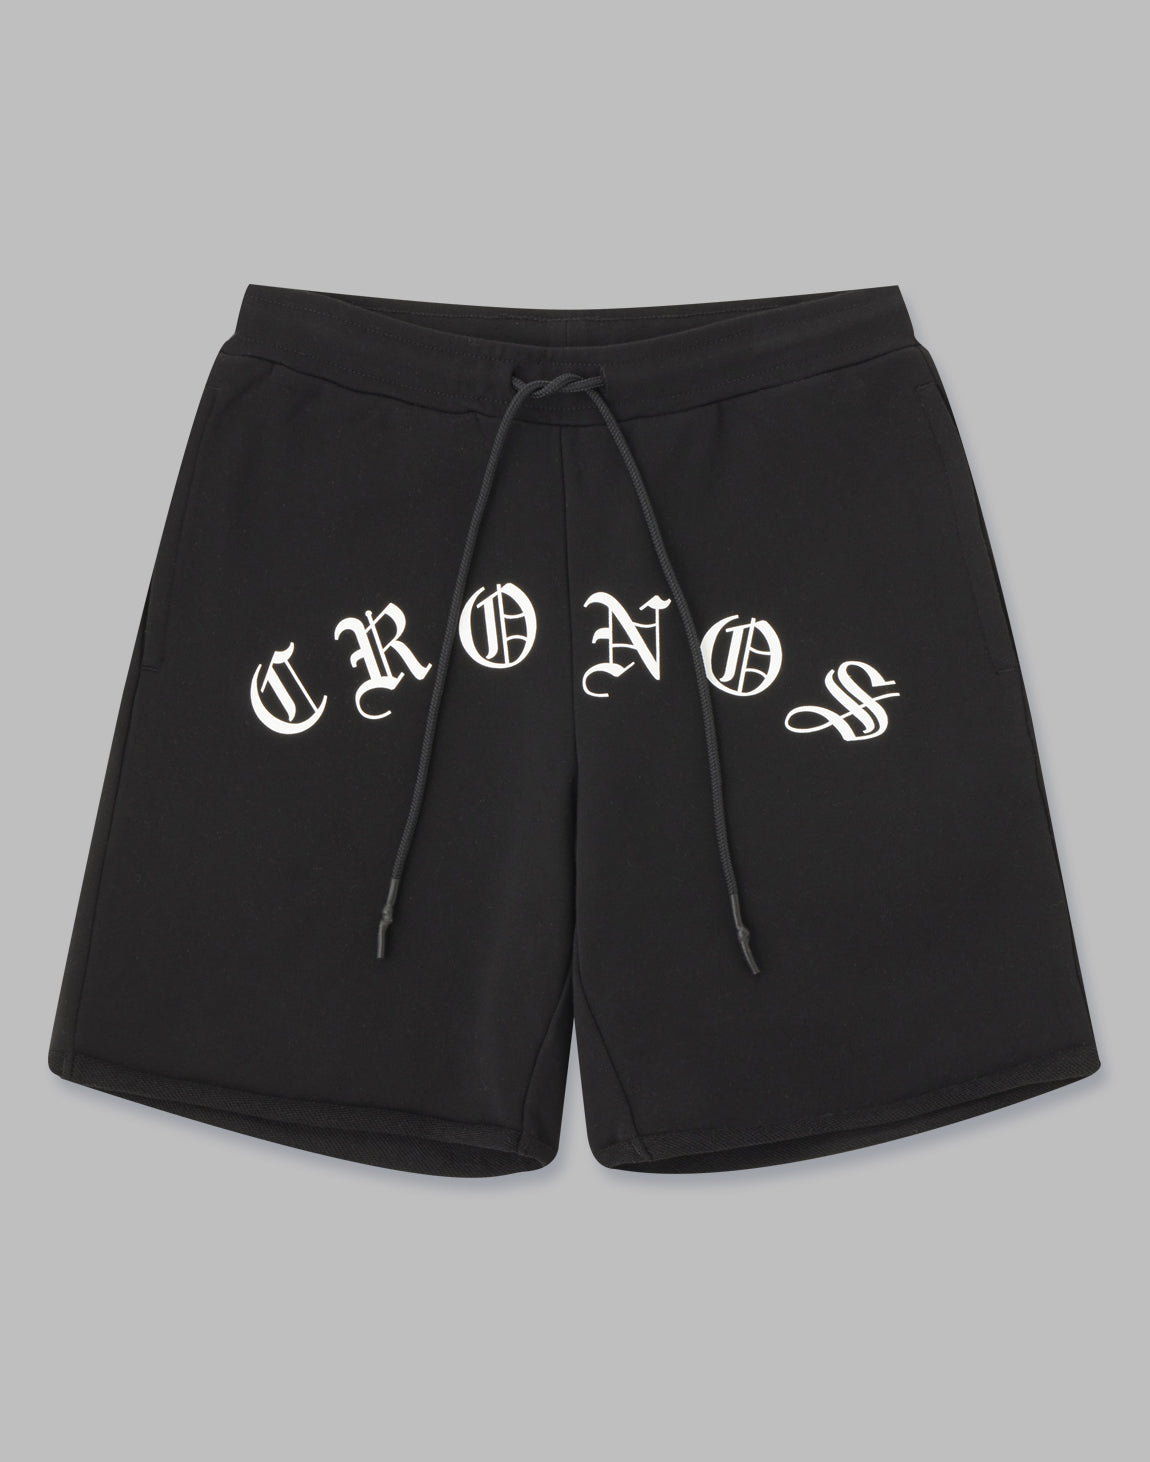 CRONOS BLACK LETTER SHORTS – クロノス CRONOS Official Store